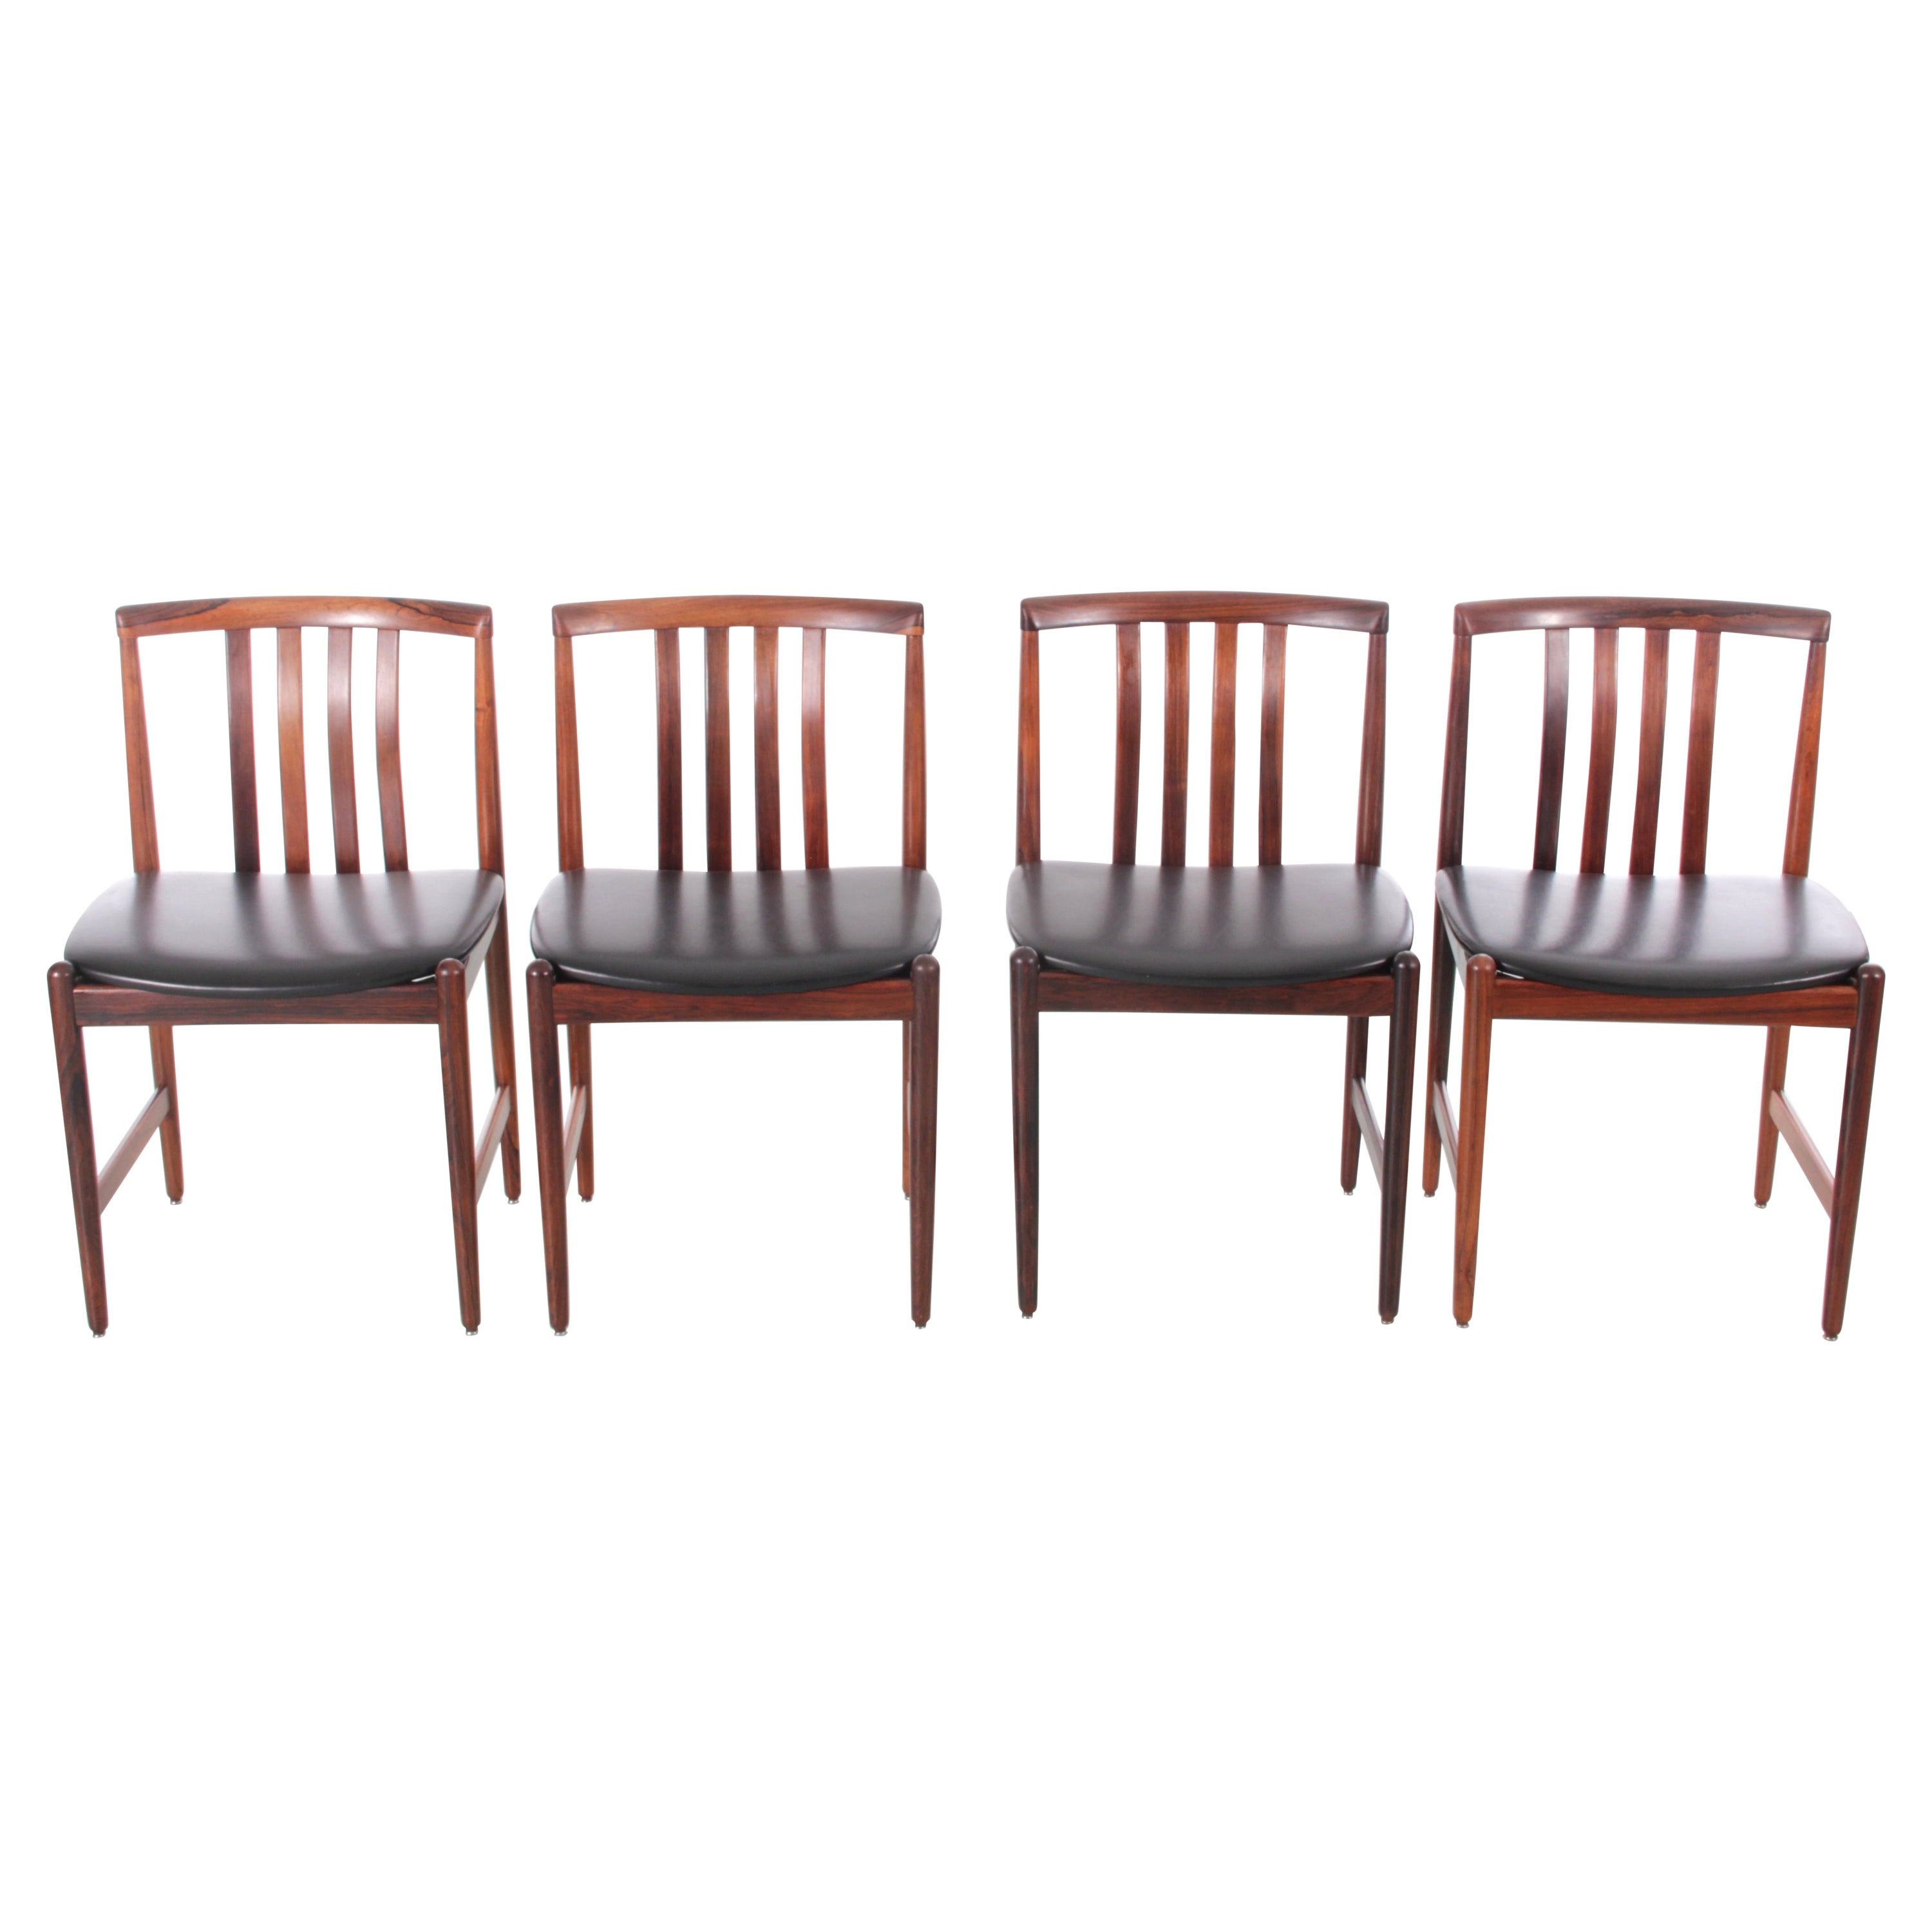 Mid-Century Modern Set of 4 Dining Chairs in Rosewood by Westnofa For Sale